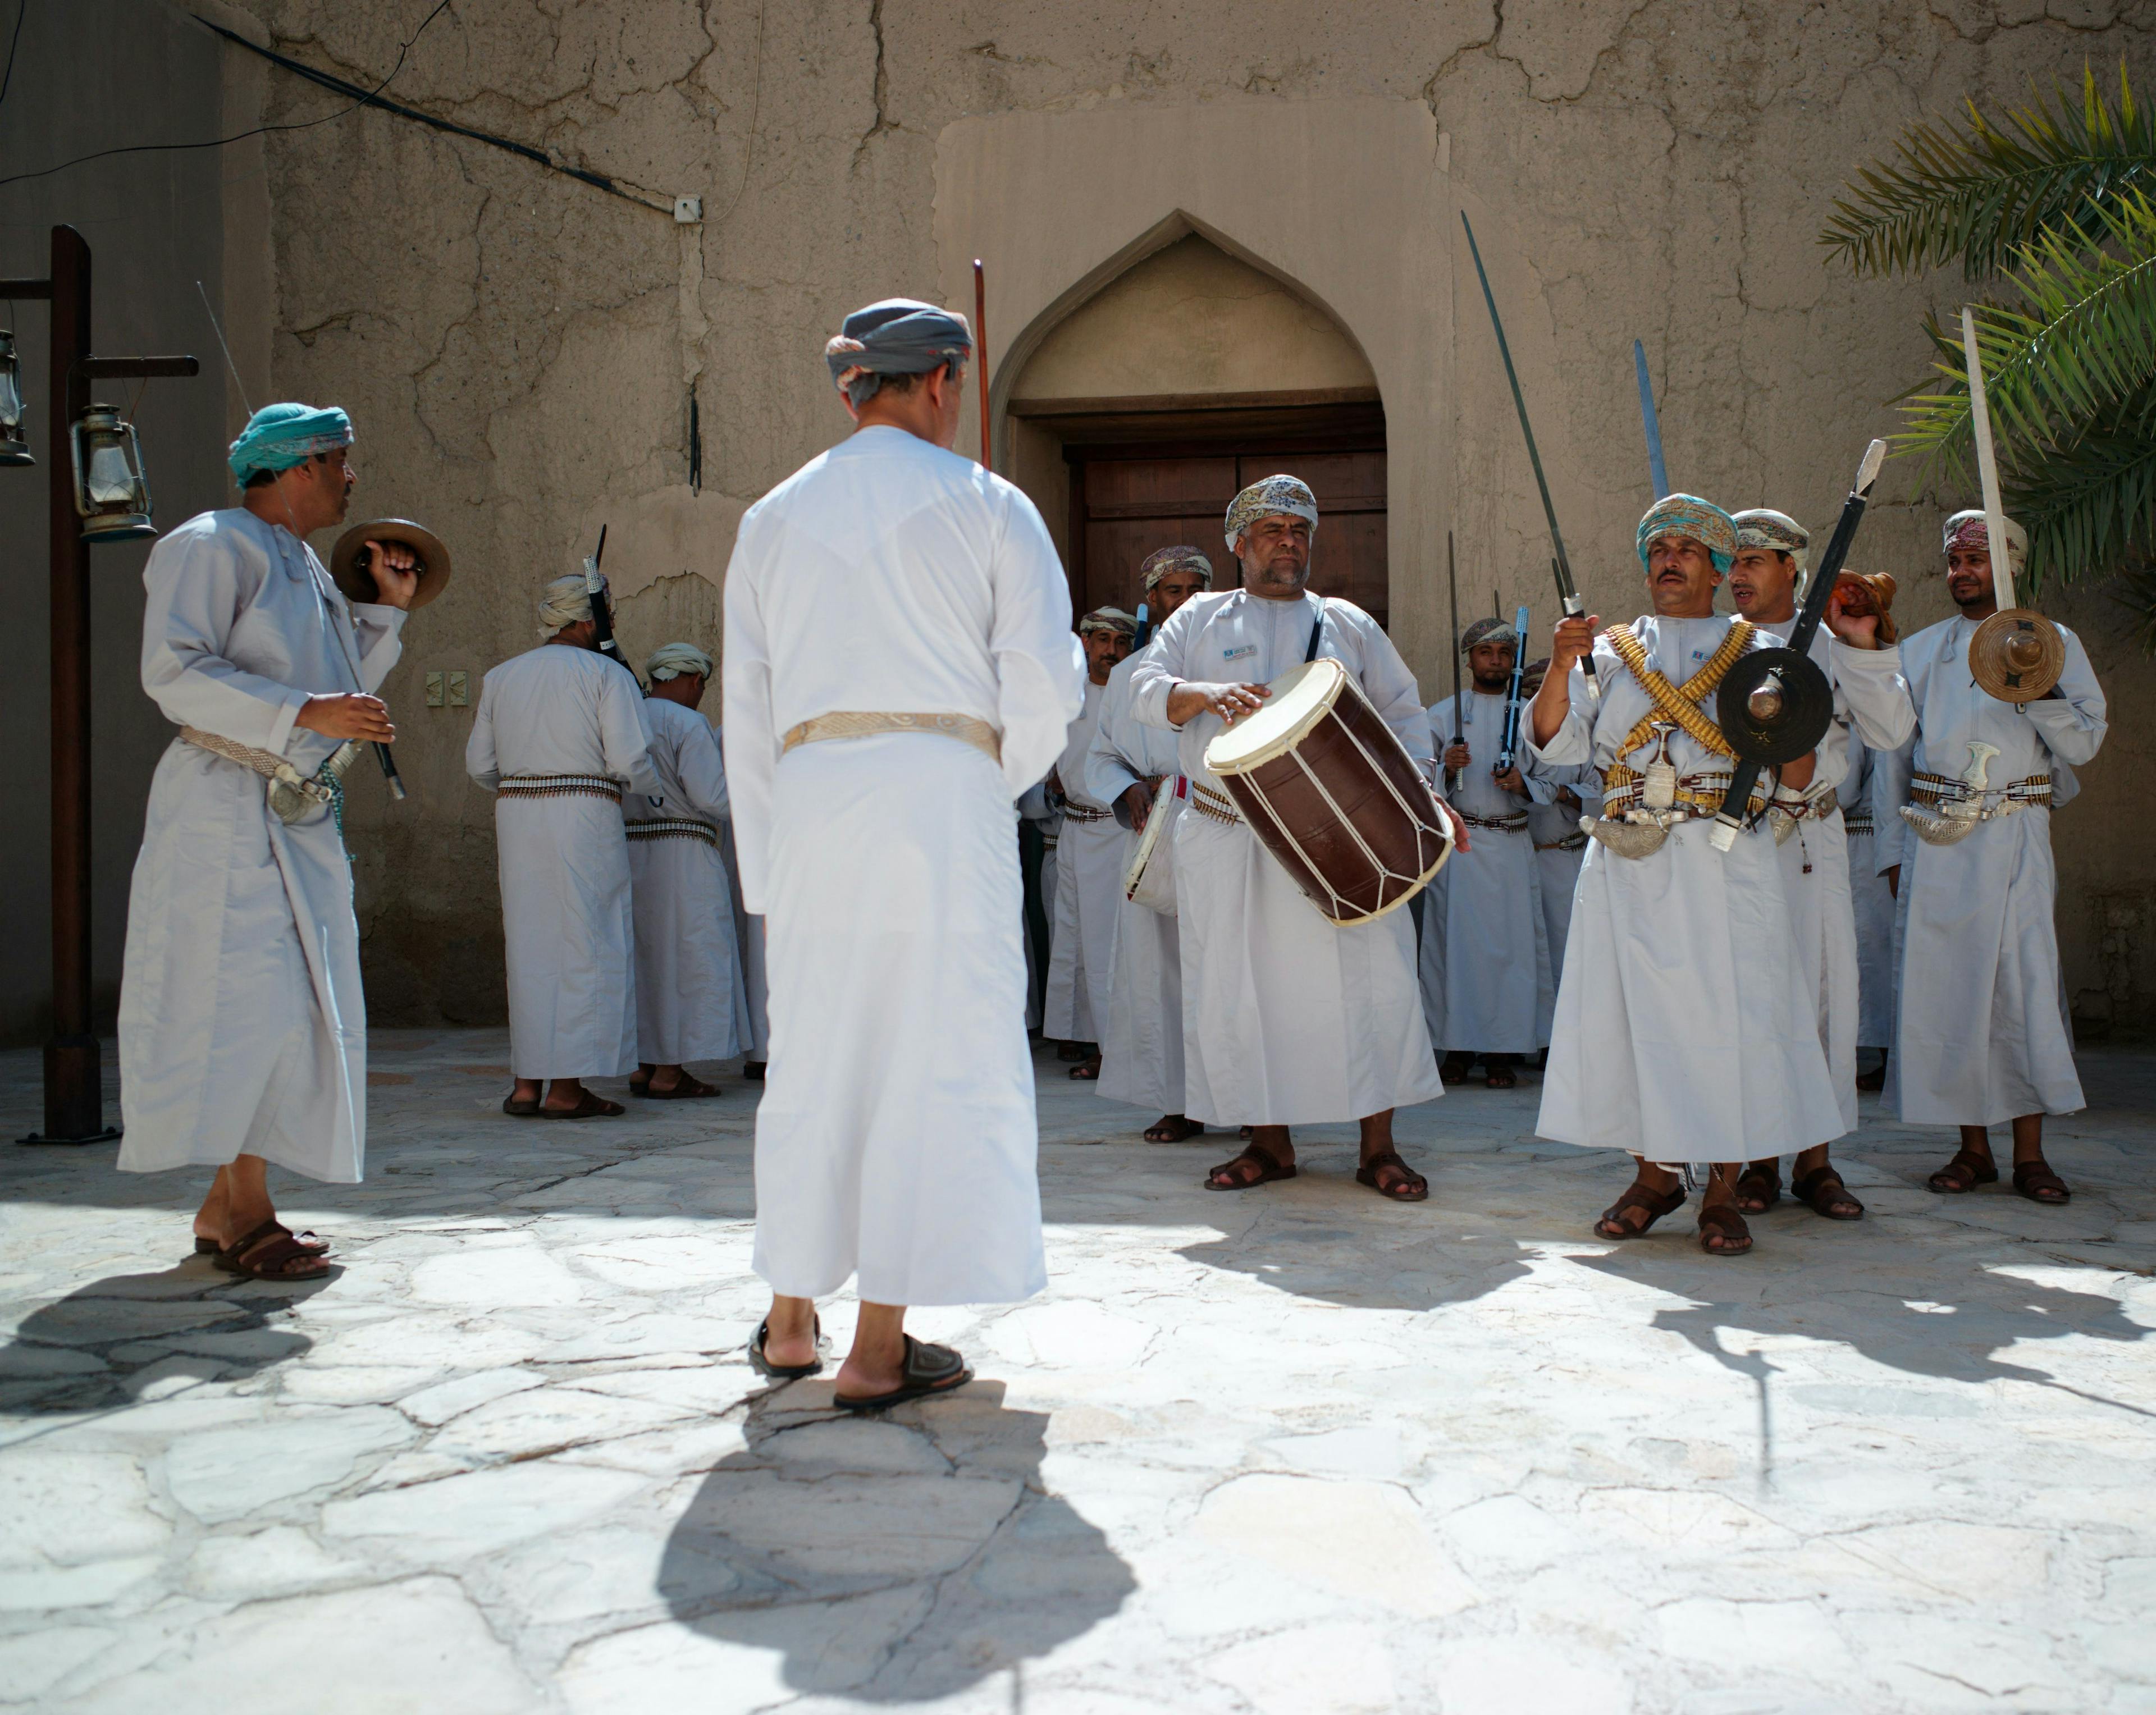 Fort guards performing ceremony in Nizwa fort Oman.